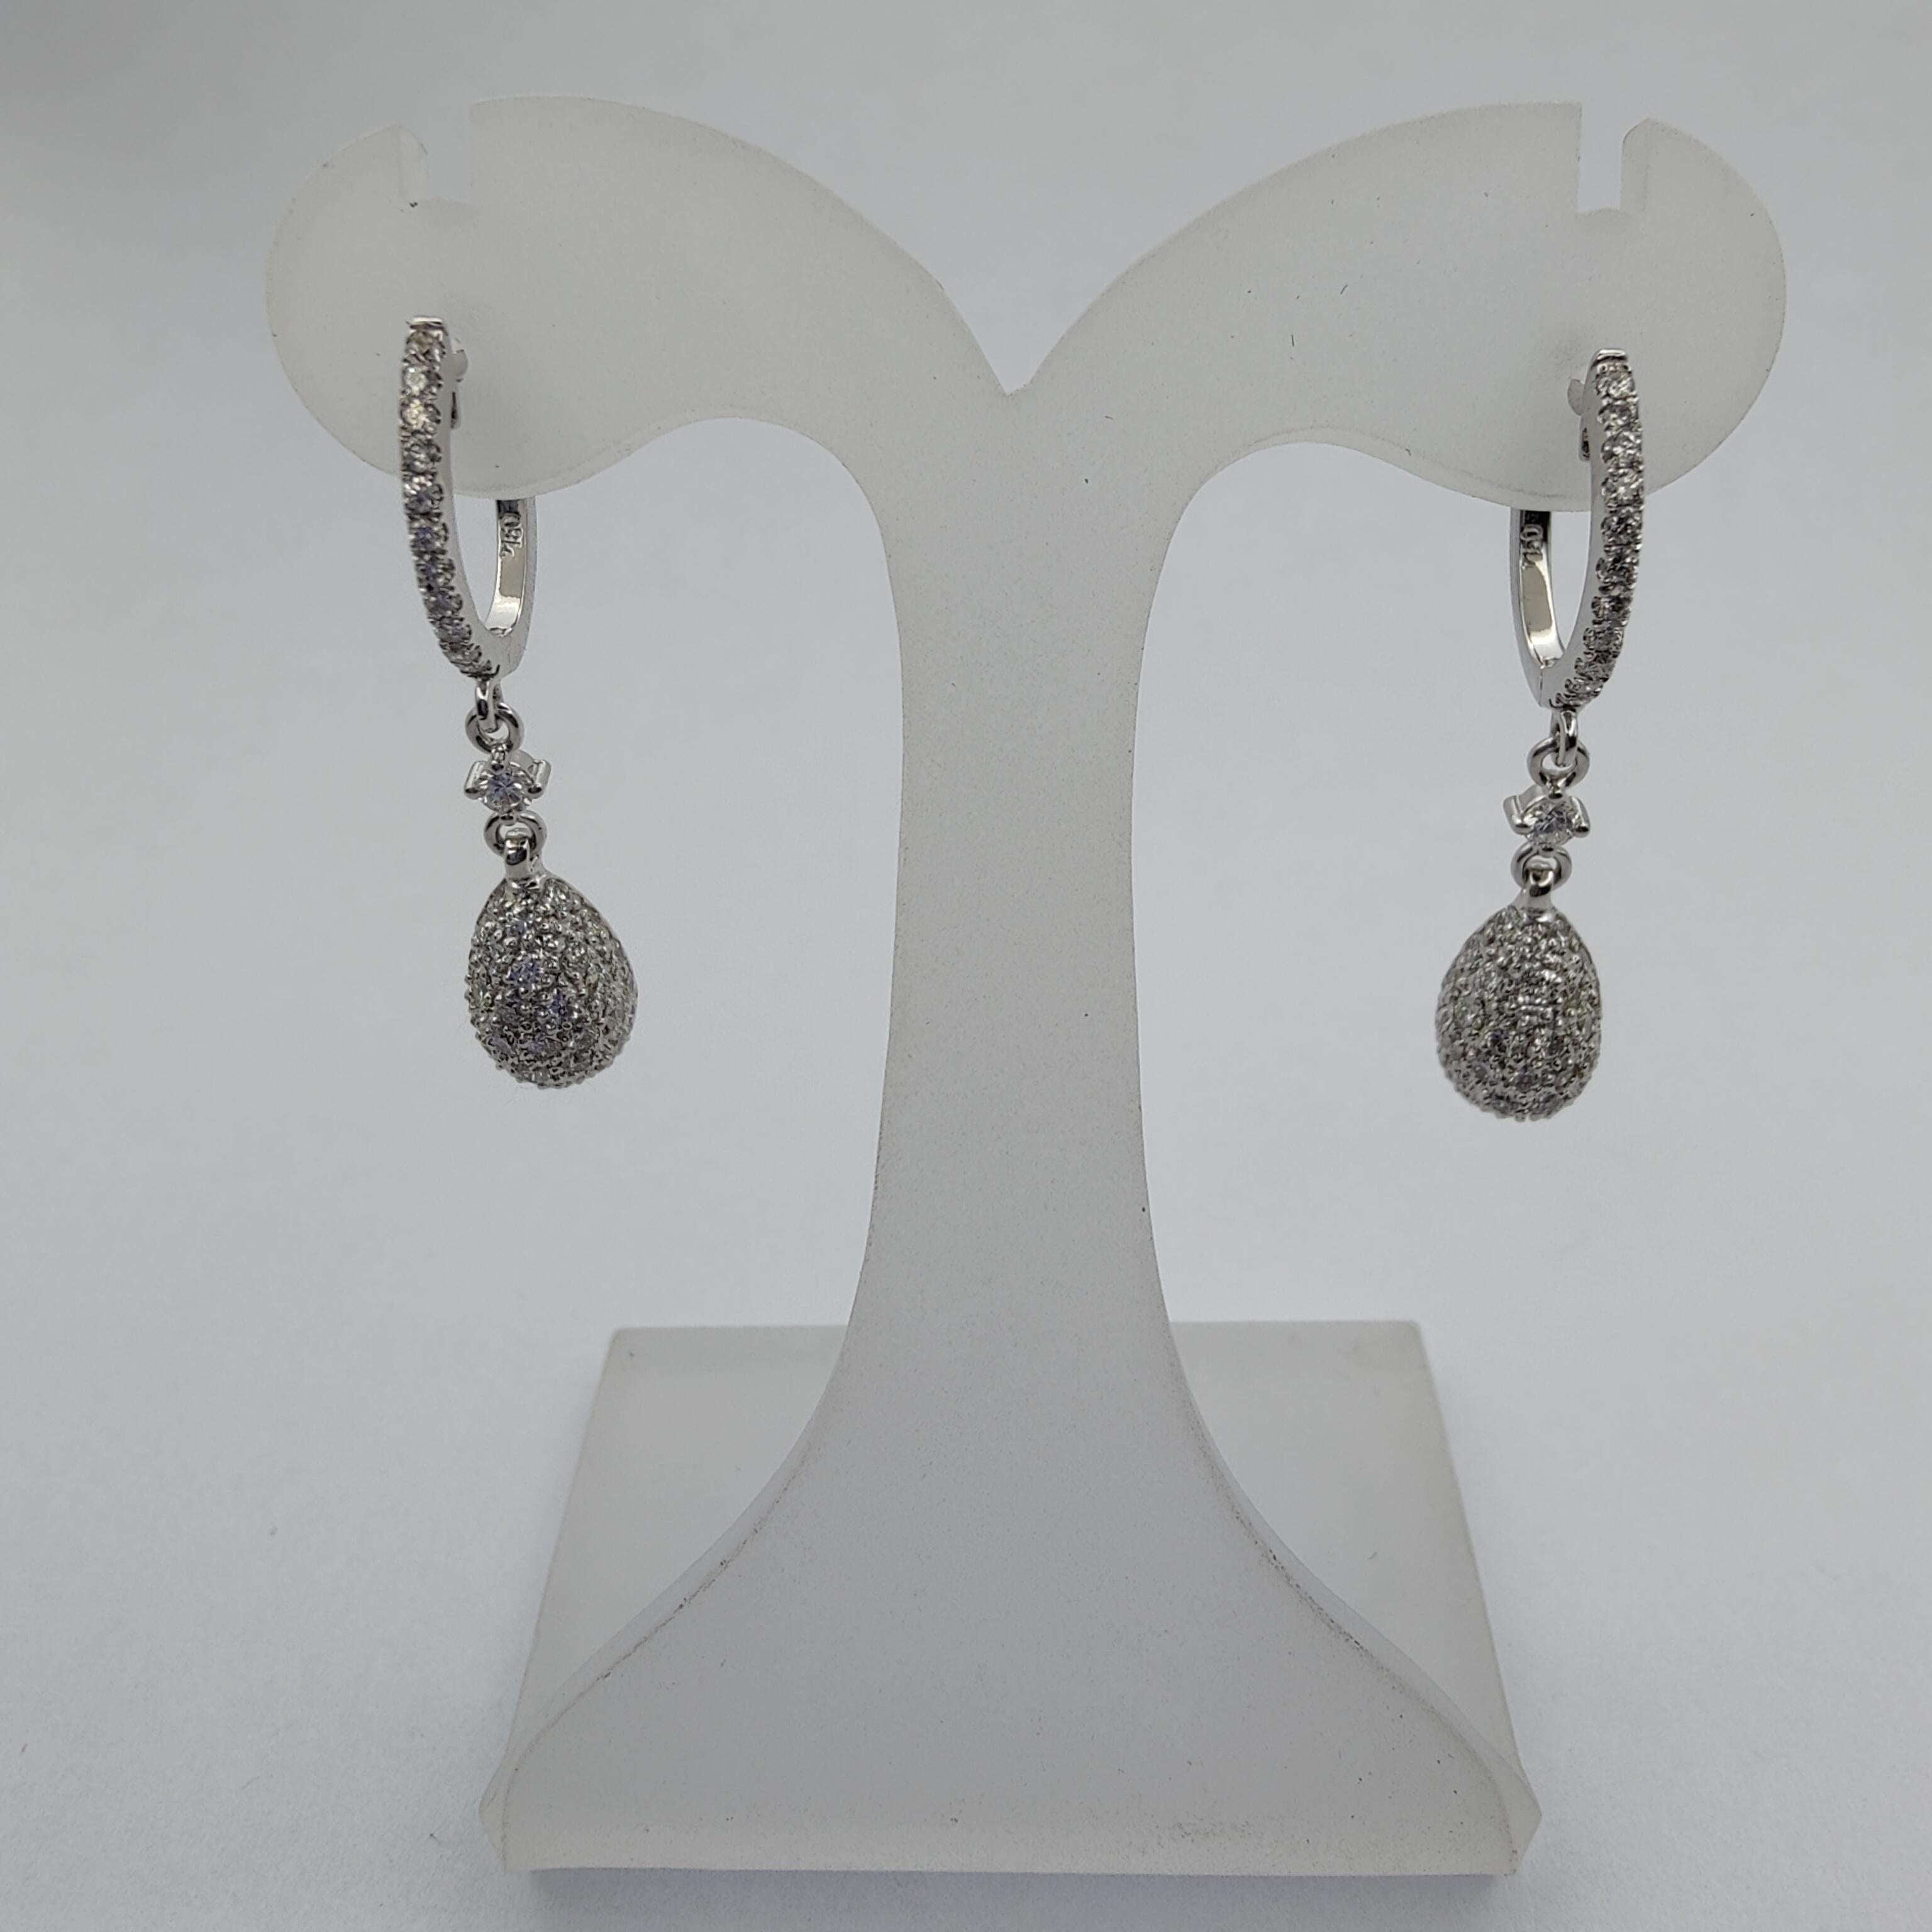 These stunning 0.99 carat diamond nugget drop earrings are the perfect accessory for any special occasion. Inspired by gold nuggets, each of these earrings is roughly oval and encrusted with a cluster of melee diamonds. The upper dangle is set with